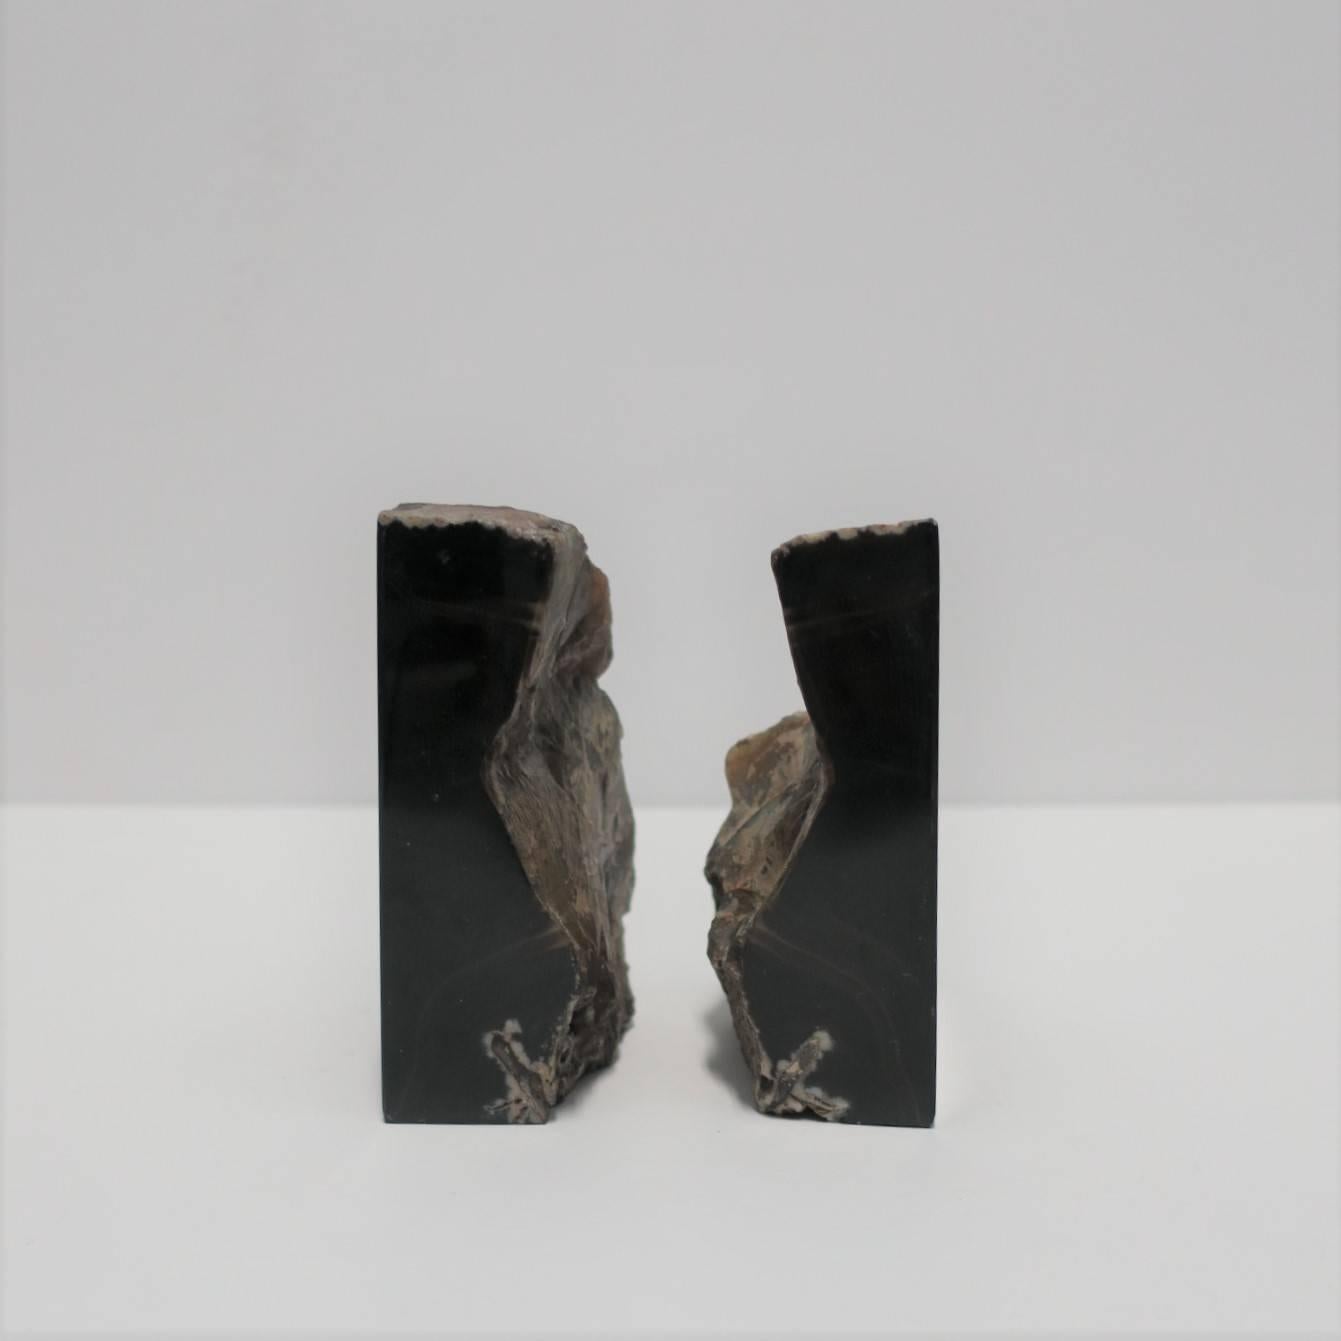 Organic Modern Pair of Dark Brown Agate Onyx Bookends or Decorative Objects